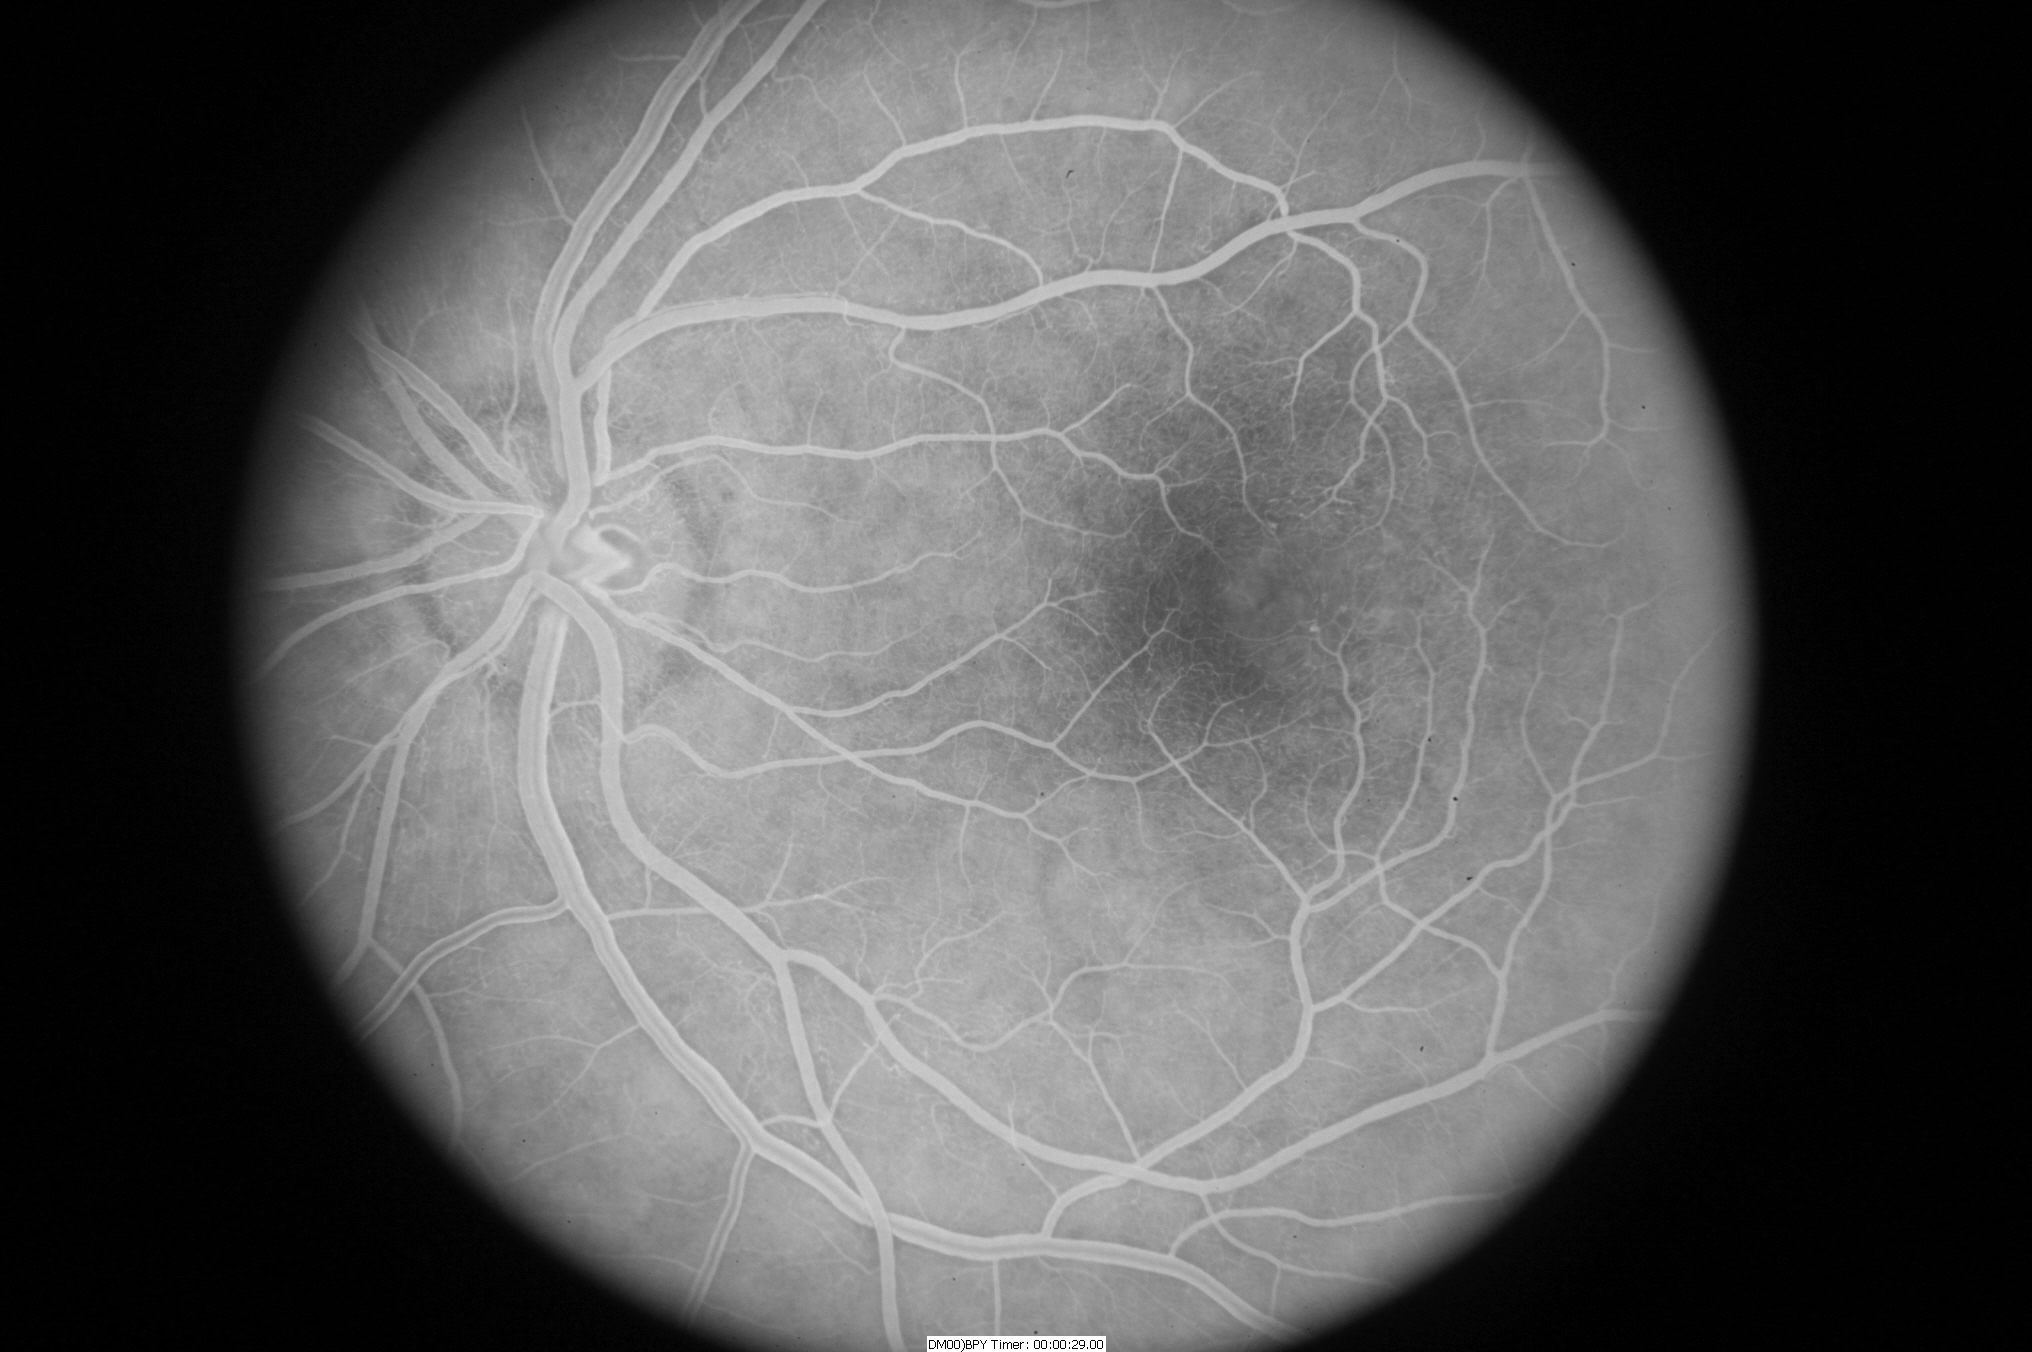 Early frames of the fluorescein angiogram show telangiectatic vessels in temporal macula. Image courtesy of John Thompson, MD